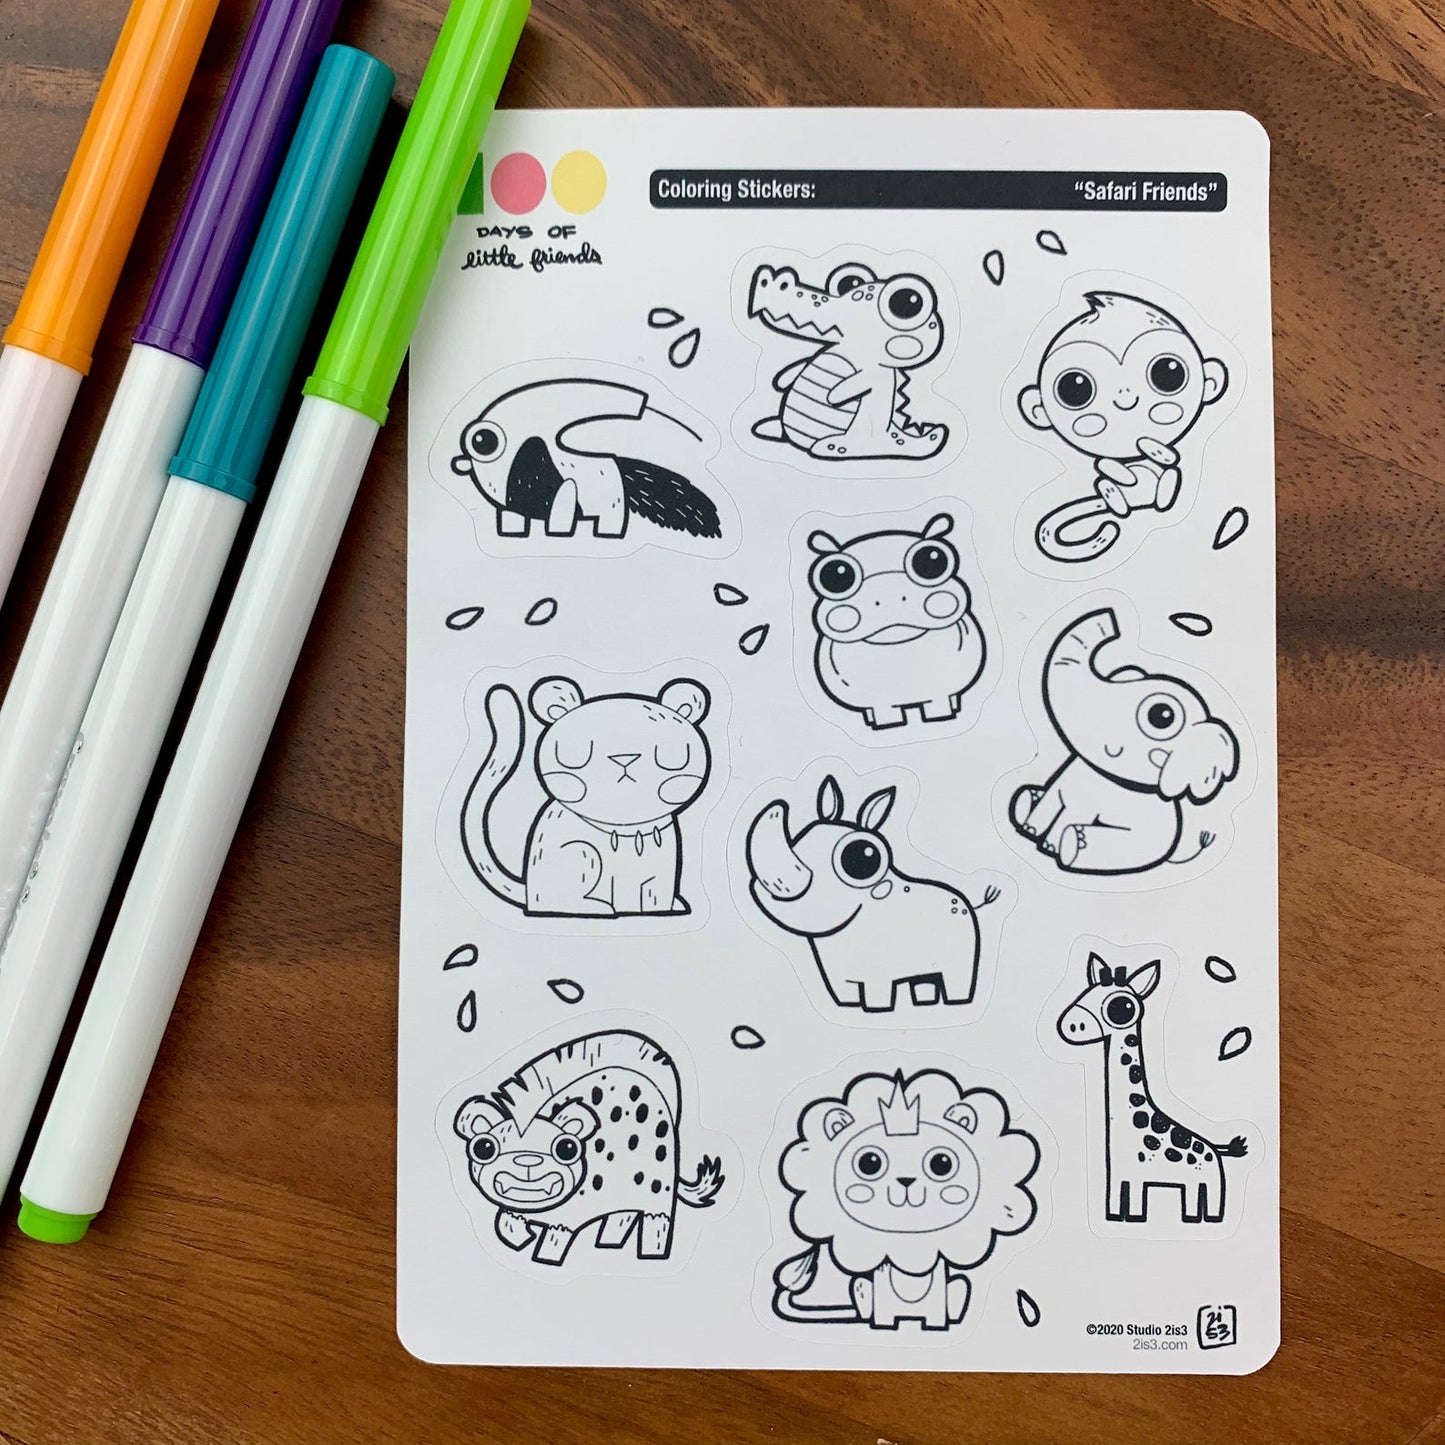 Markers and a sticker sheet with 10 little animal stickers on it. A Anteater, Alligator, Monkey, Hippo, Panther, Rhino, Elephant, Hyena, Lion, and Giraffe.